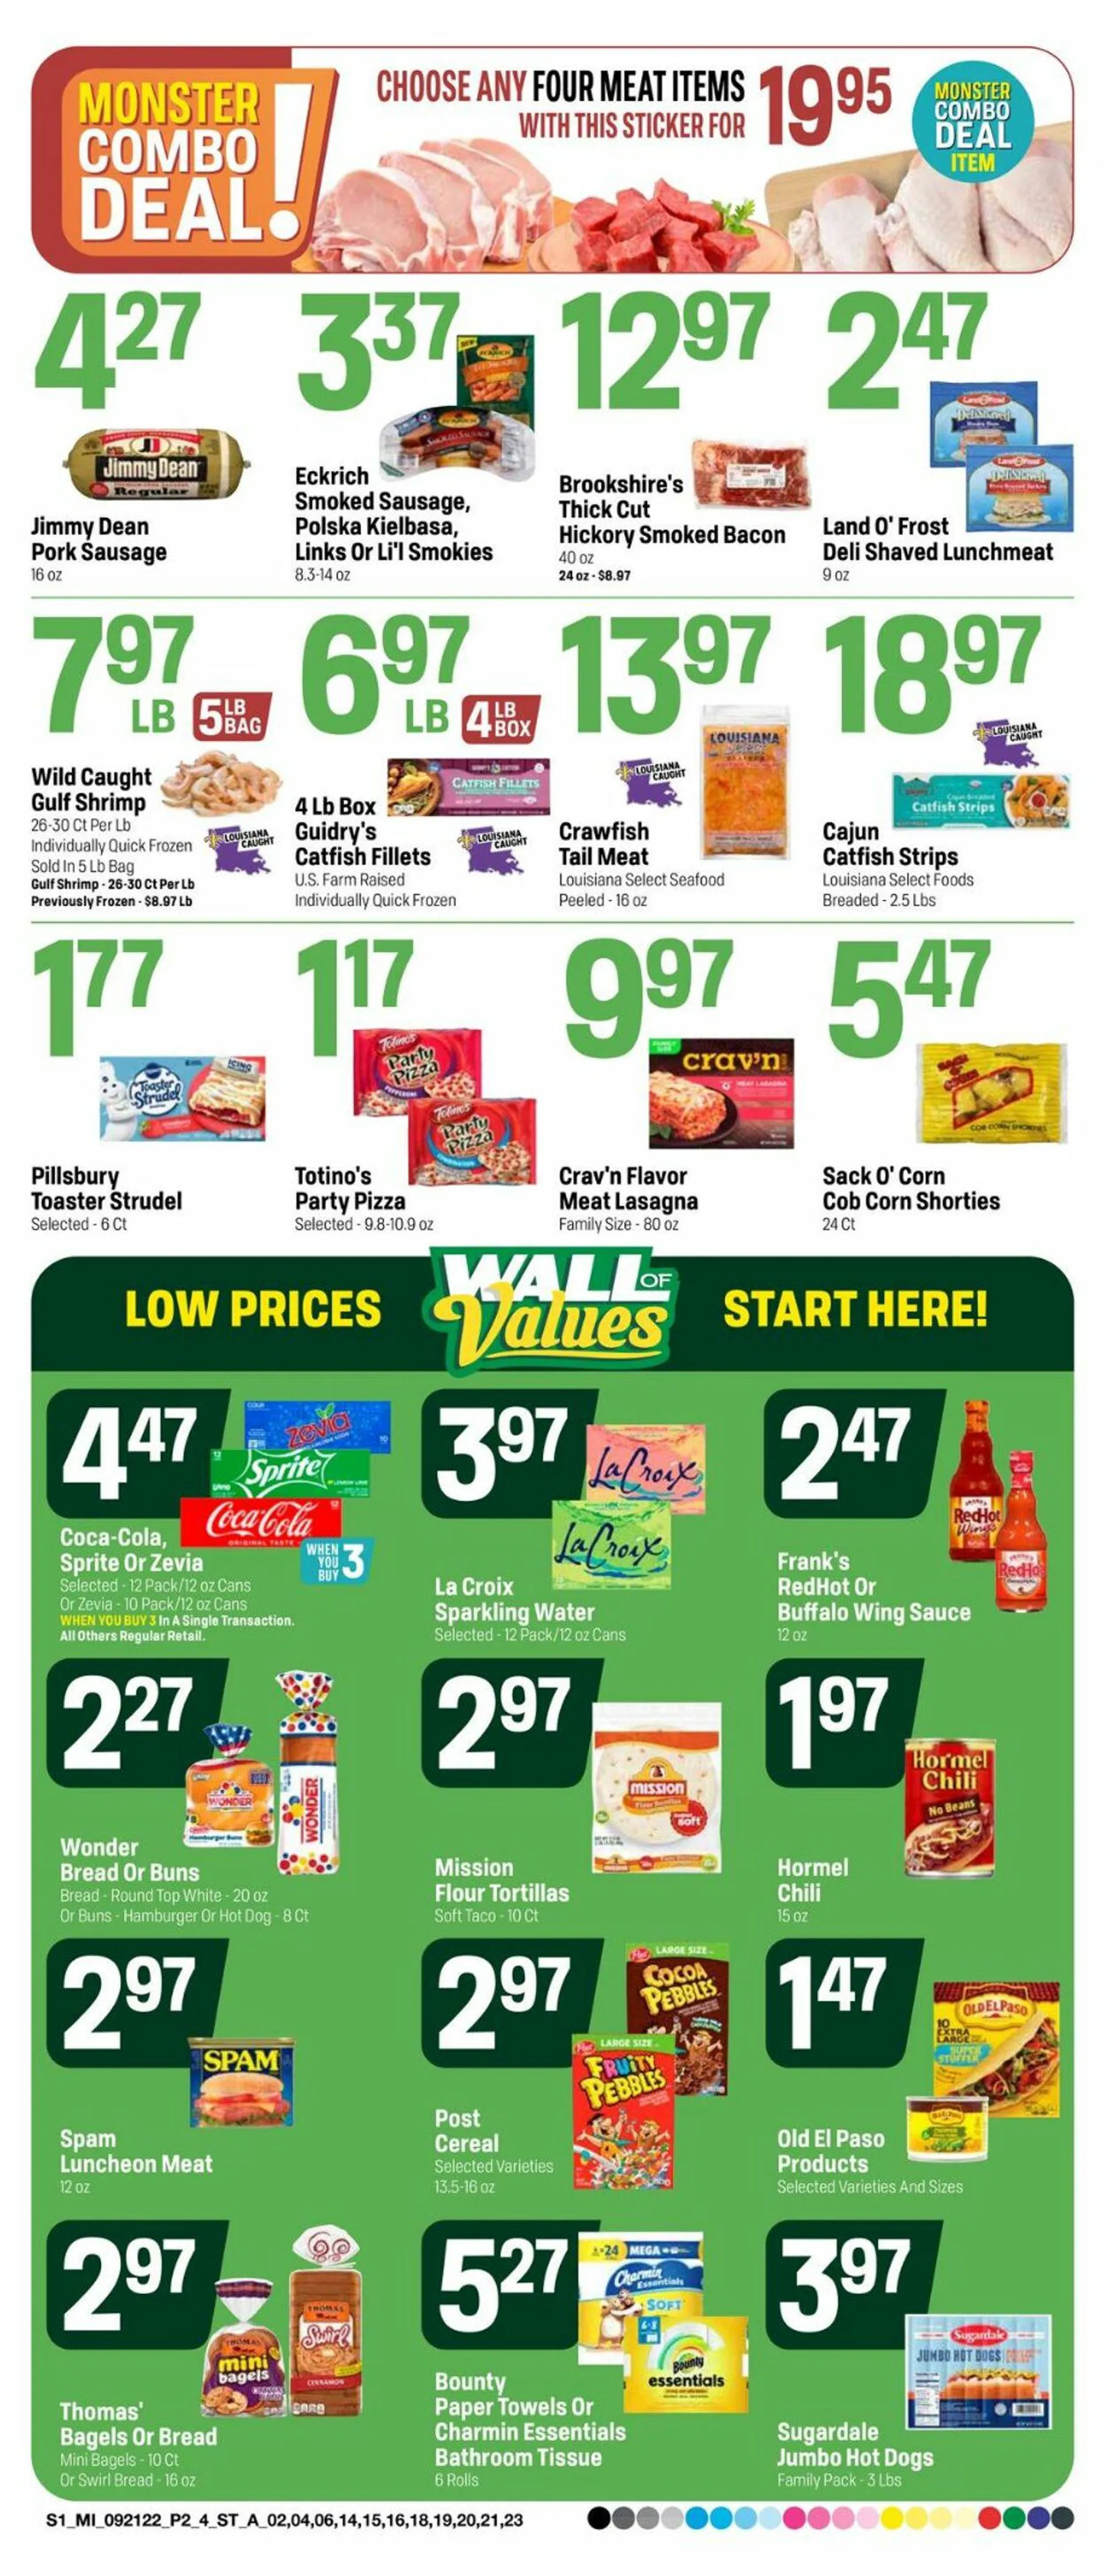 Super 1 Foods Current weekly ad - 2